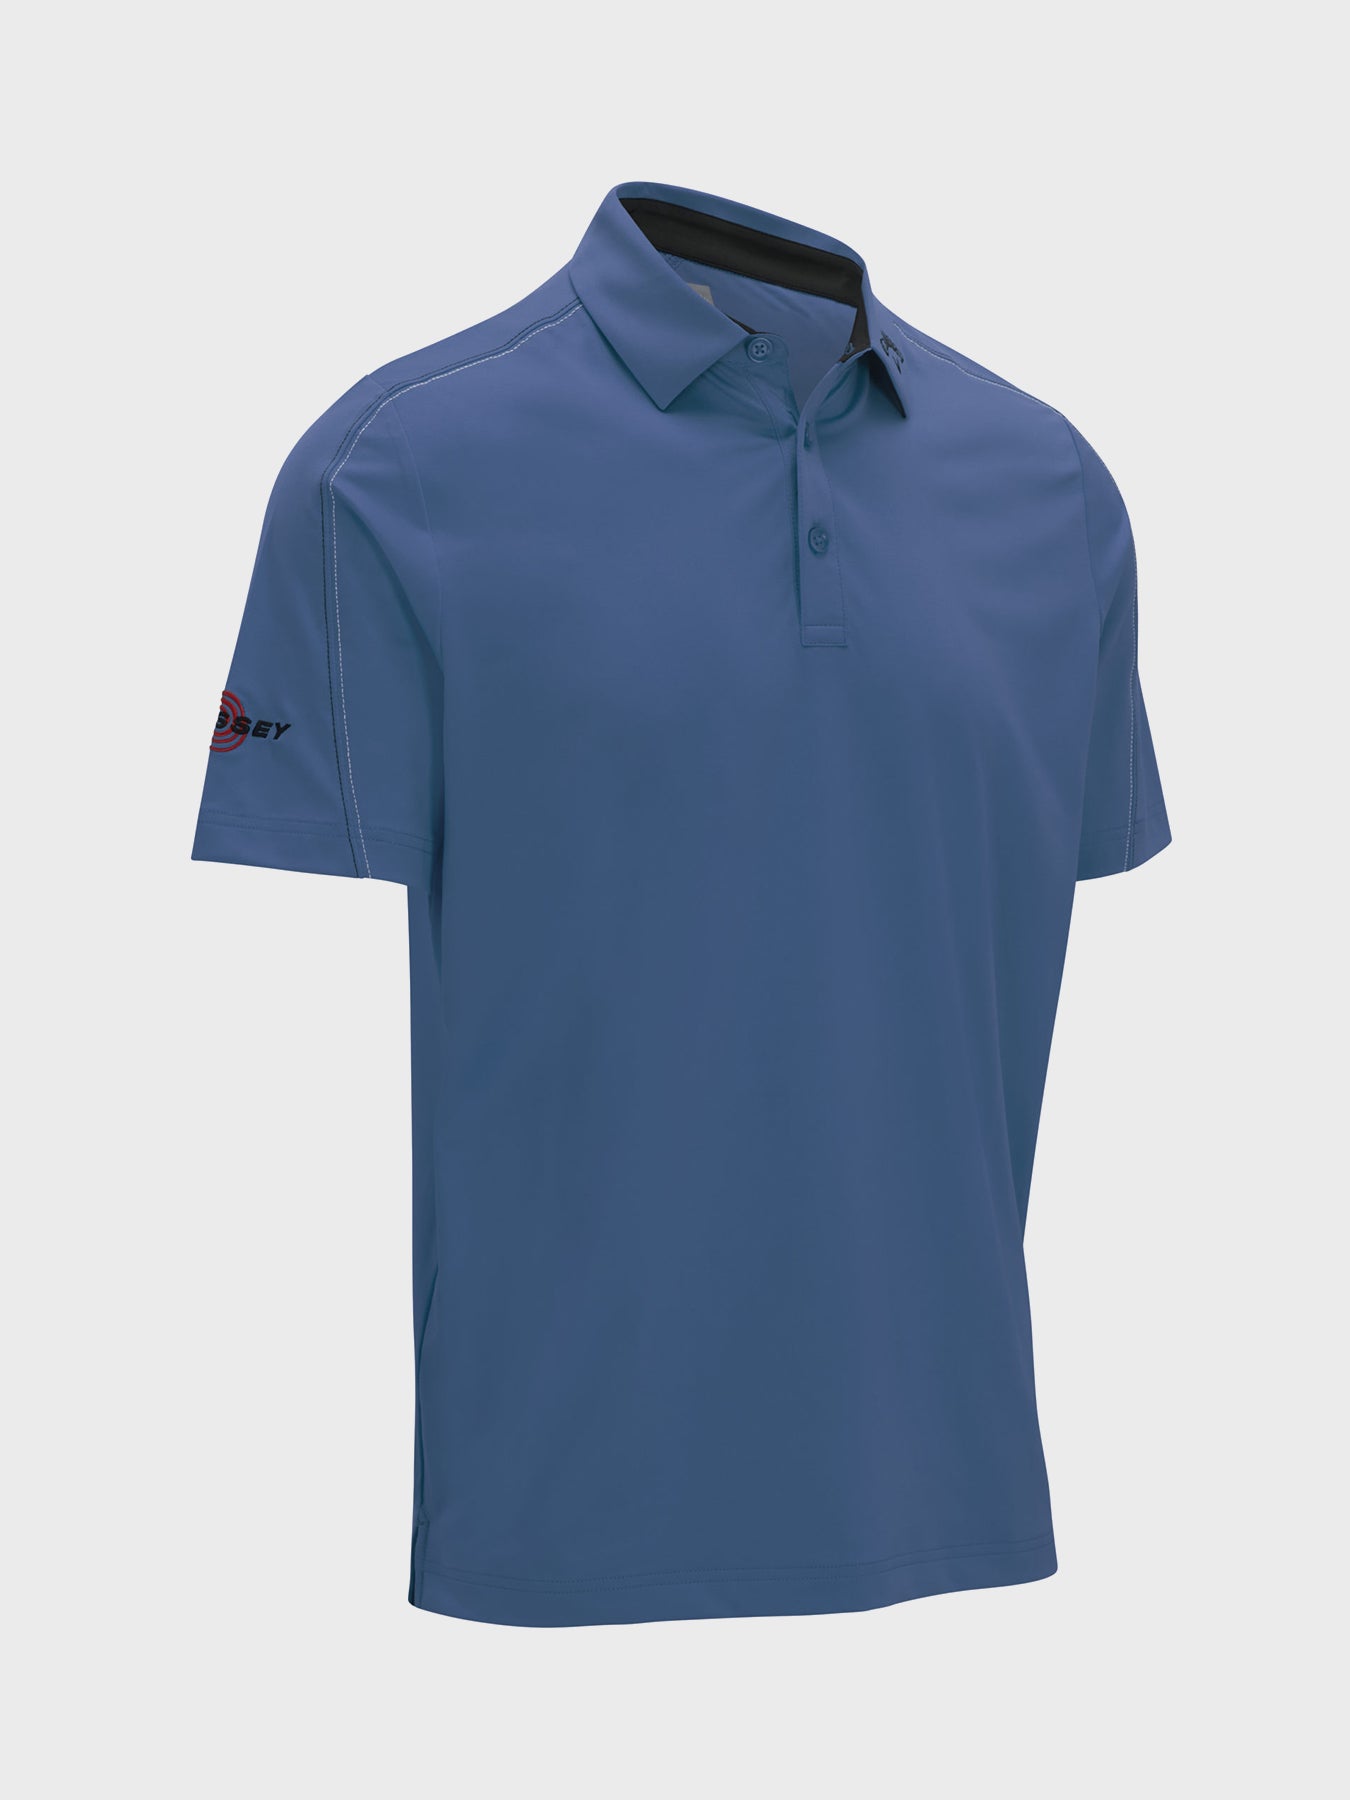 View Odyssey Double Stitch Polo In Blue Horizon information